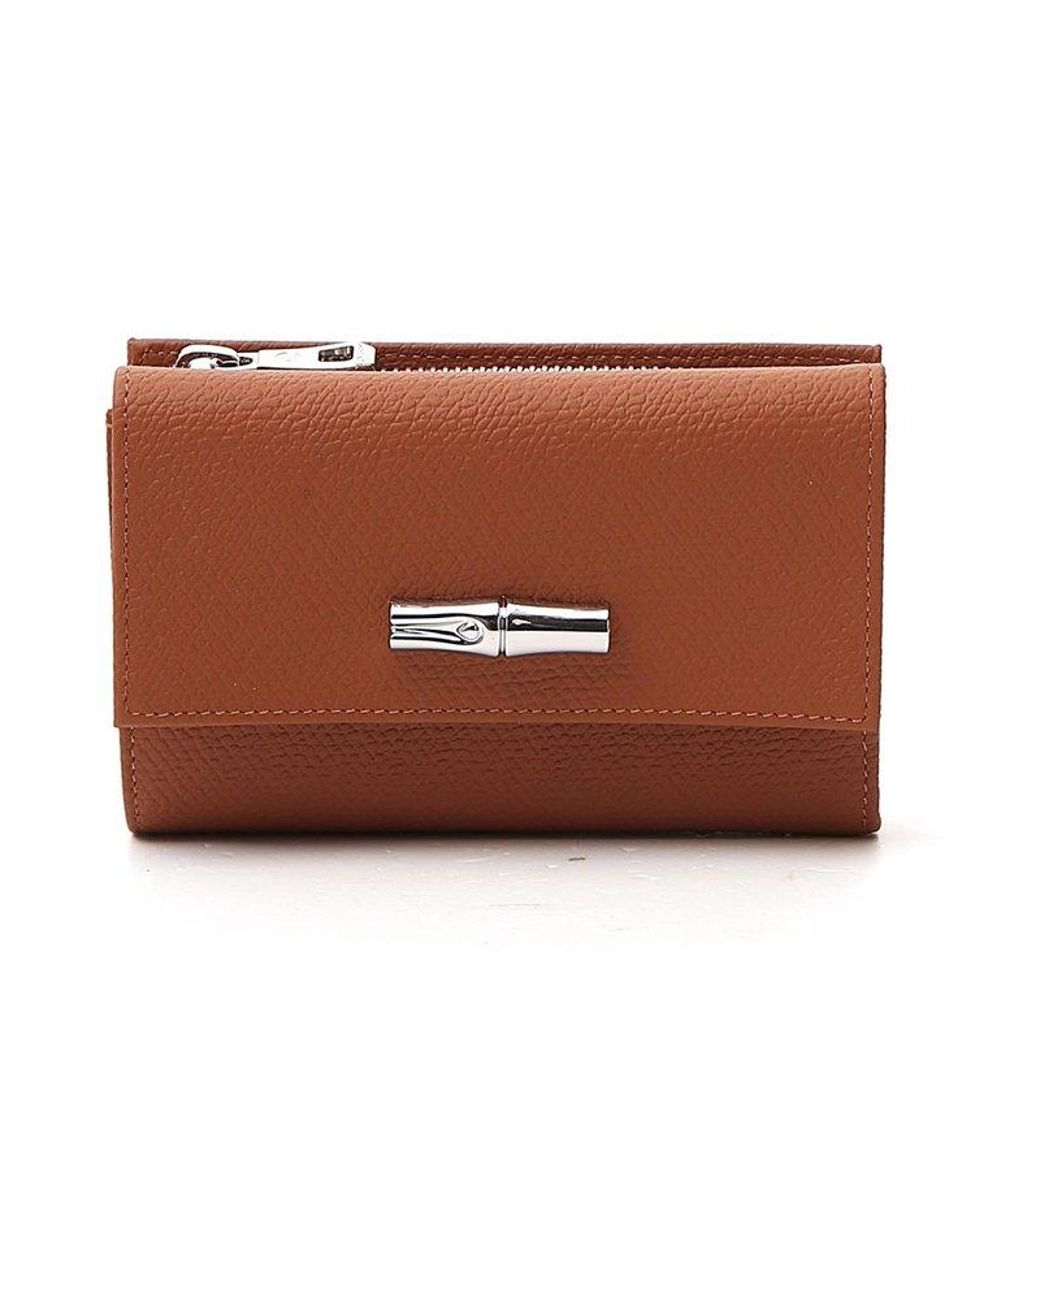 Longchamp Roseau Zipped Compact Wallet in Natural | Lyst